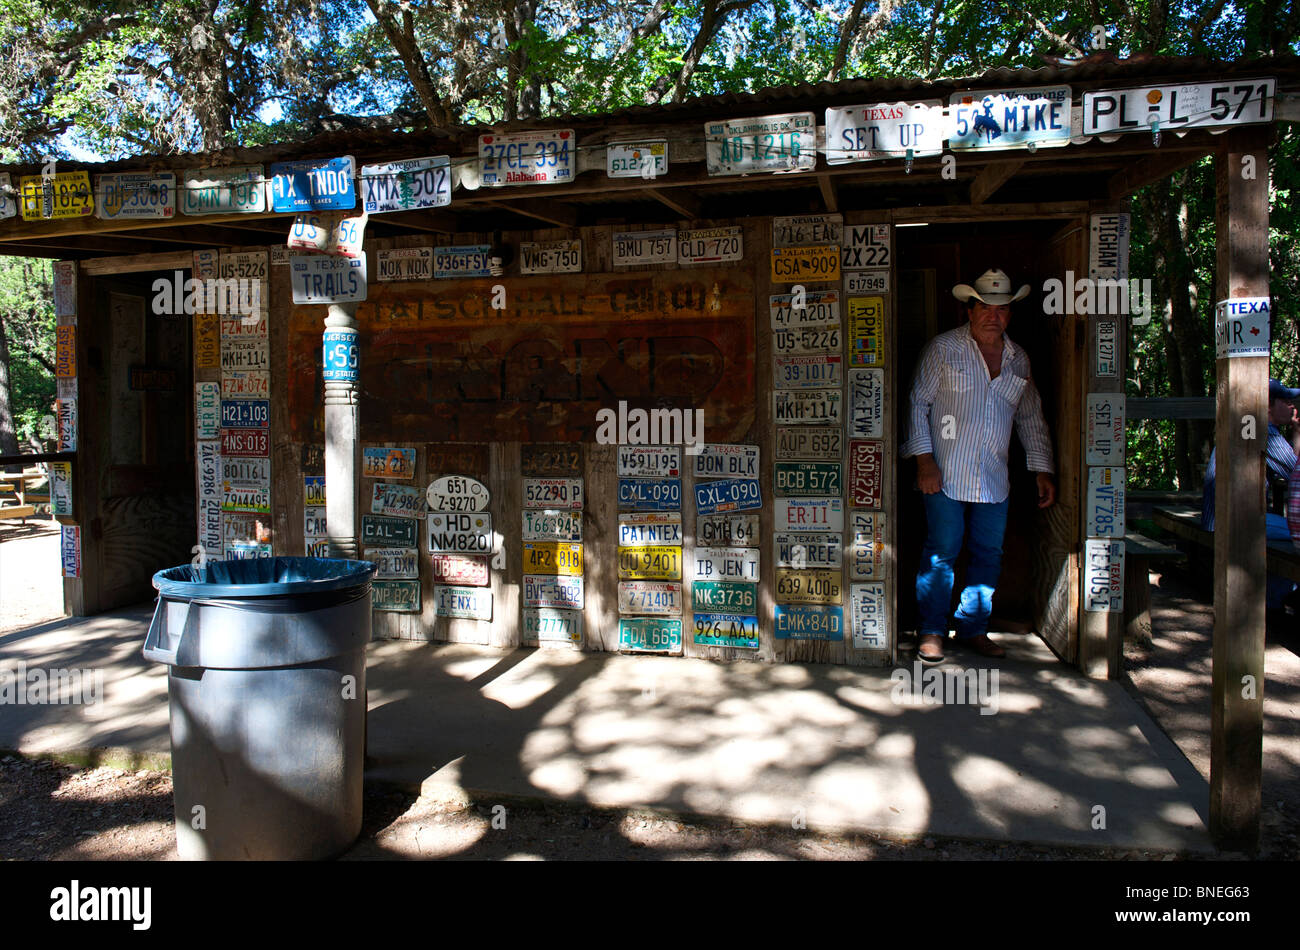 Man coming out of restroom with license plates, Luckenbach, Hill country, Texas, USA Stock Photo